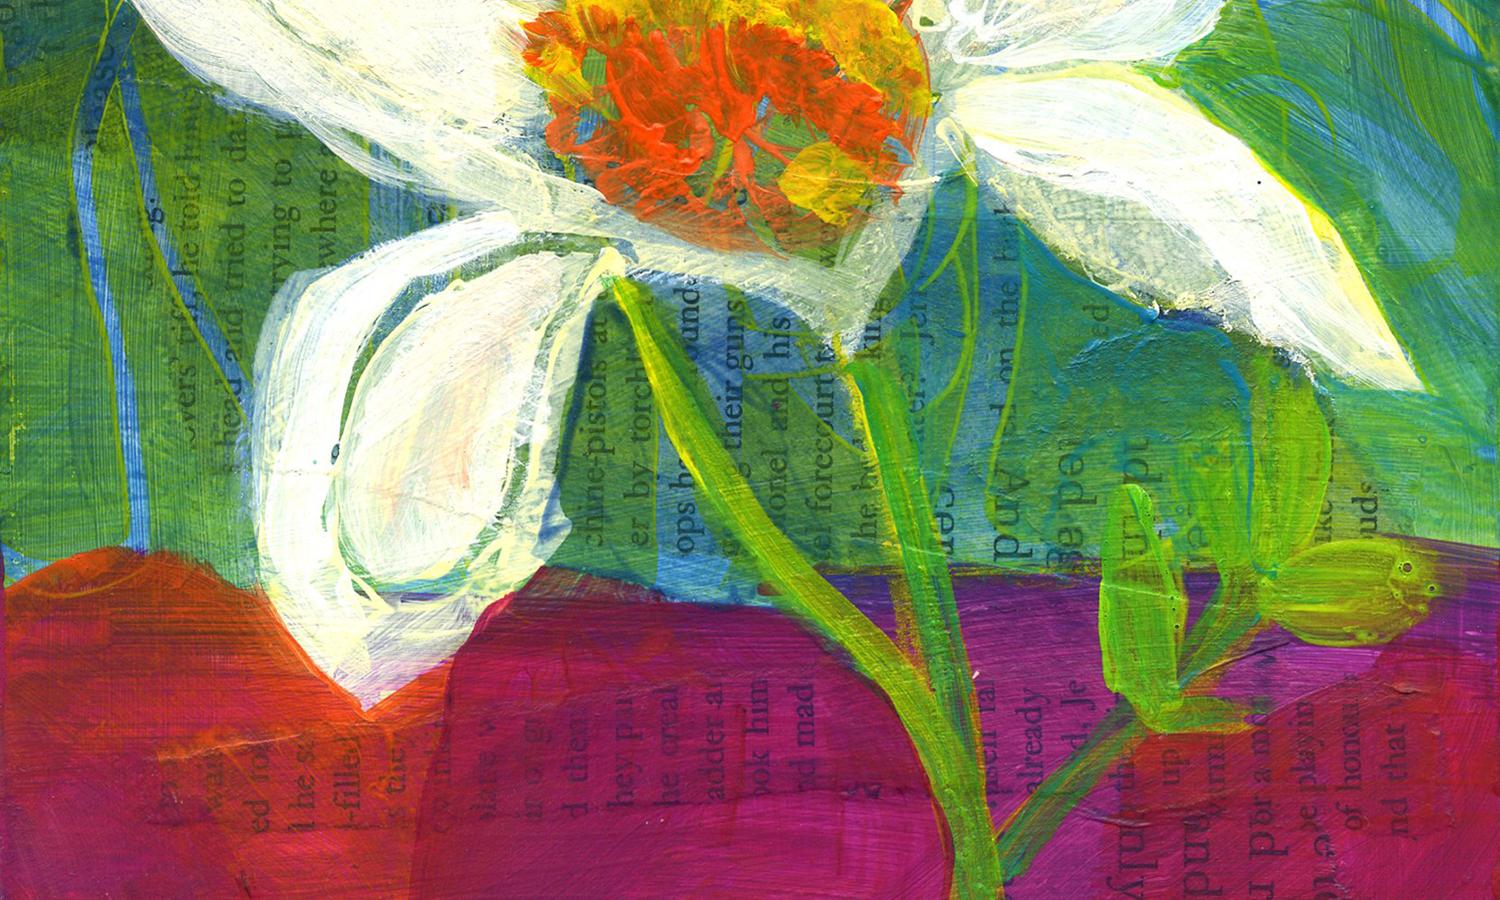 <p>Artist Comments<br />Small-scale floral portrait with nice presence. The flower's white petals flow across the composition. The deep green and blue backdrop draw the eye and build depth in the scene. Collaged book pages add interest. Part of a